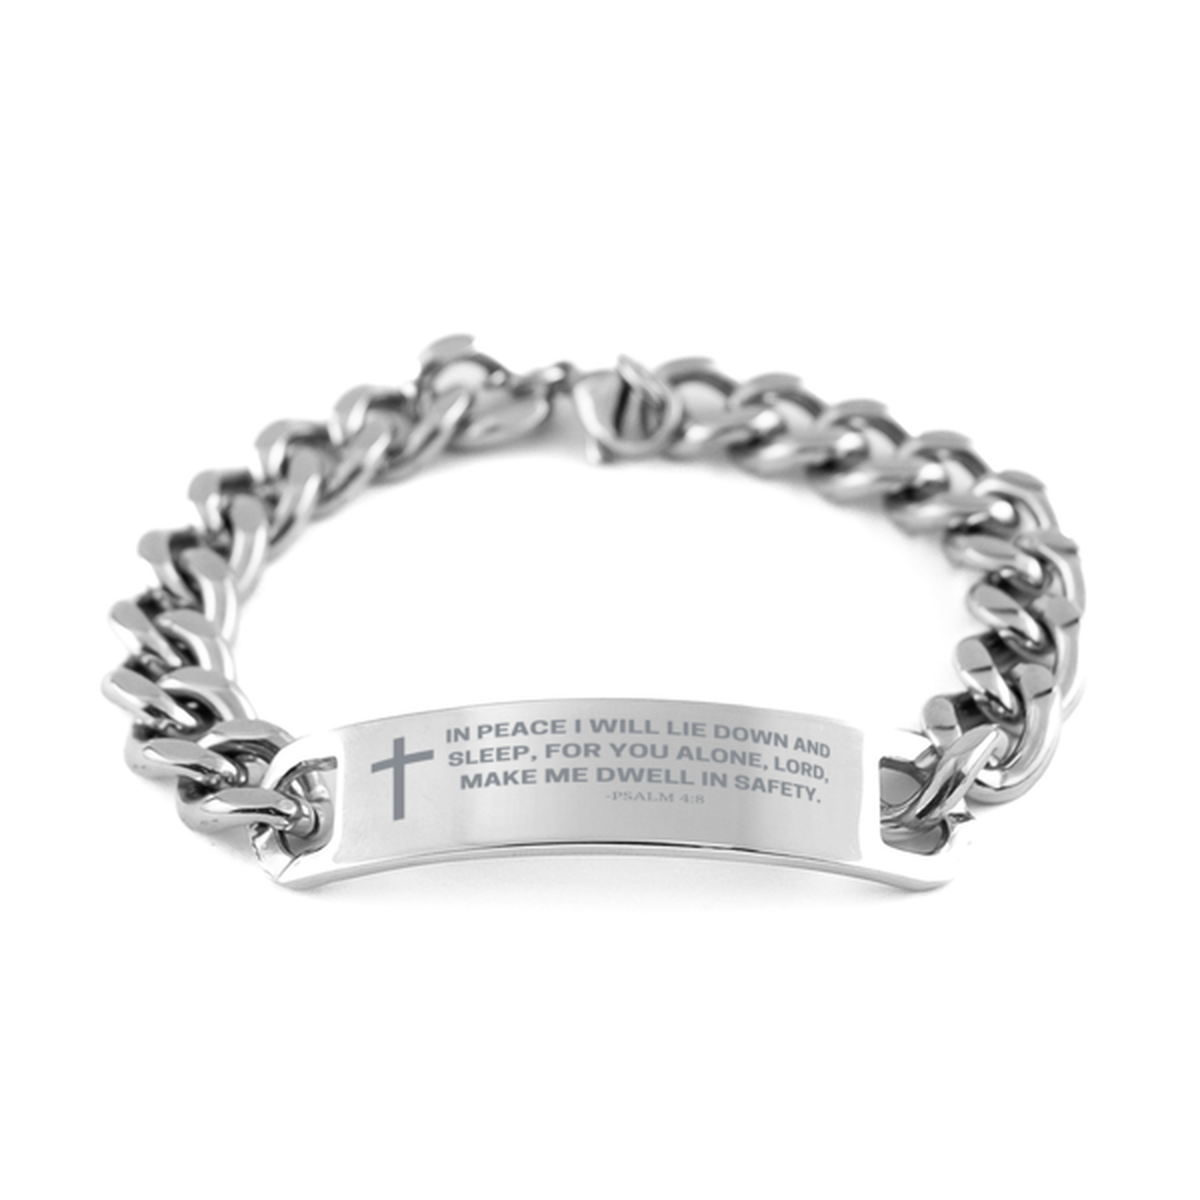 Baptism Gifts For Teenage Boys Girls, Christian Bible Verse Cuban Chain Bracelet, In peace I will lie down and sleep, Catholic Confirmation Gifts for Son, Godson, Grandson, Nephew